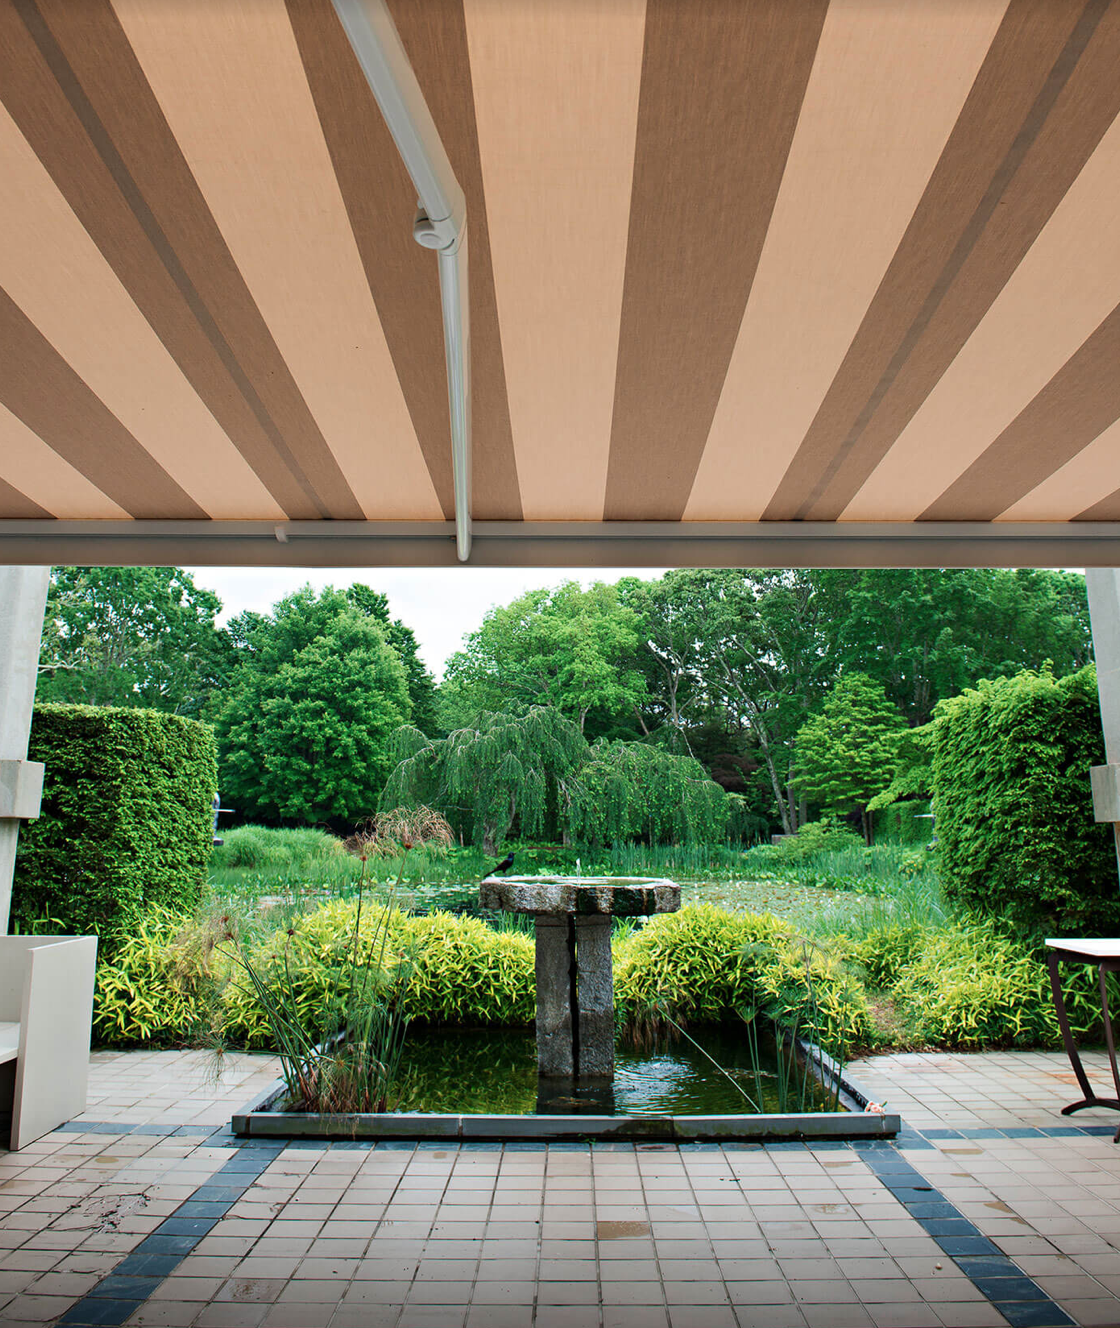 Sunbrella fabrics are used for the most durable and sustainable umbrellas, outdoor furnishings, and awnings! They’re GREENGUARD® Gold Certified, OEKO-TEX® Certified, and have the Skin Cancer Foundation Seal of Approval. What we can expect to see: Durable outdoor fabrics, luxurious to the touch!